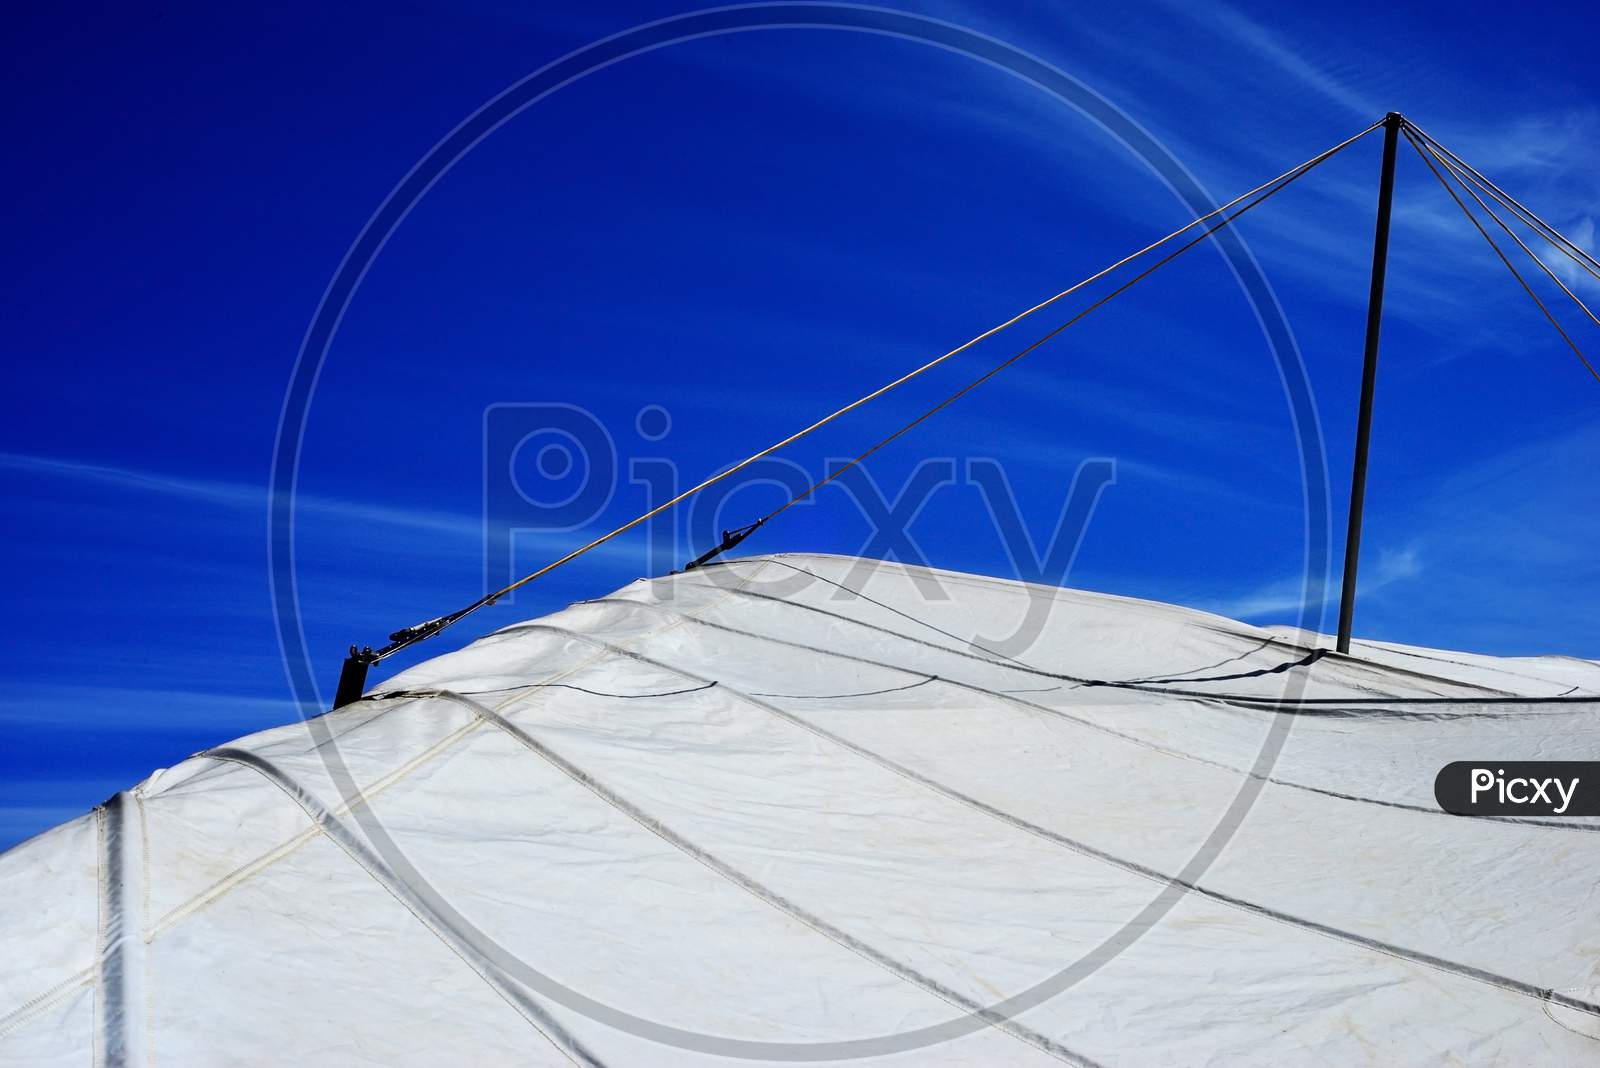 Hang glider wing on a deep blue sky